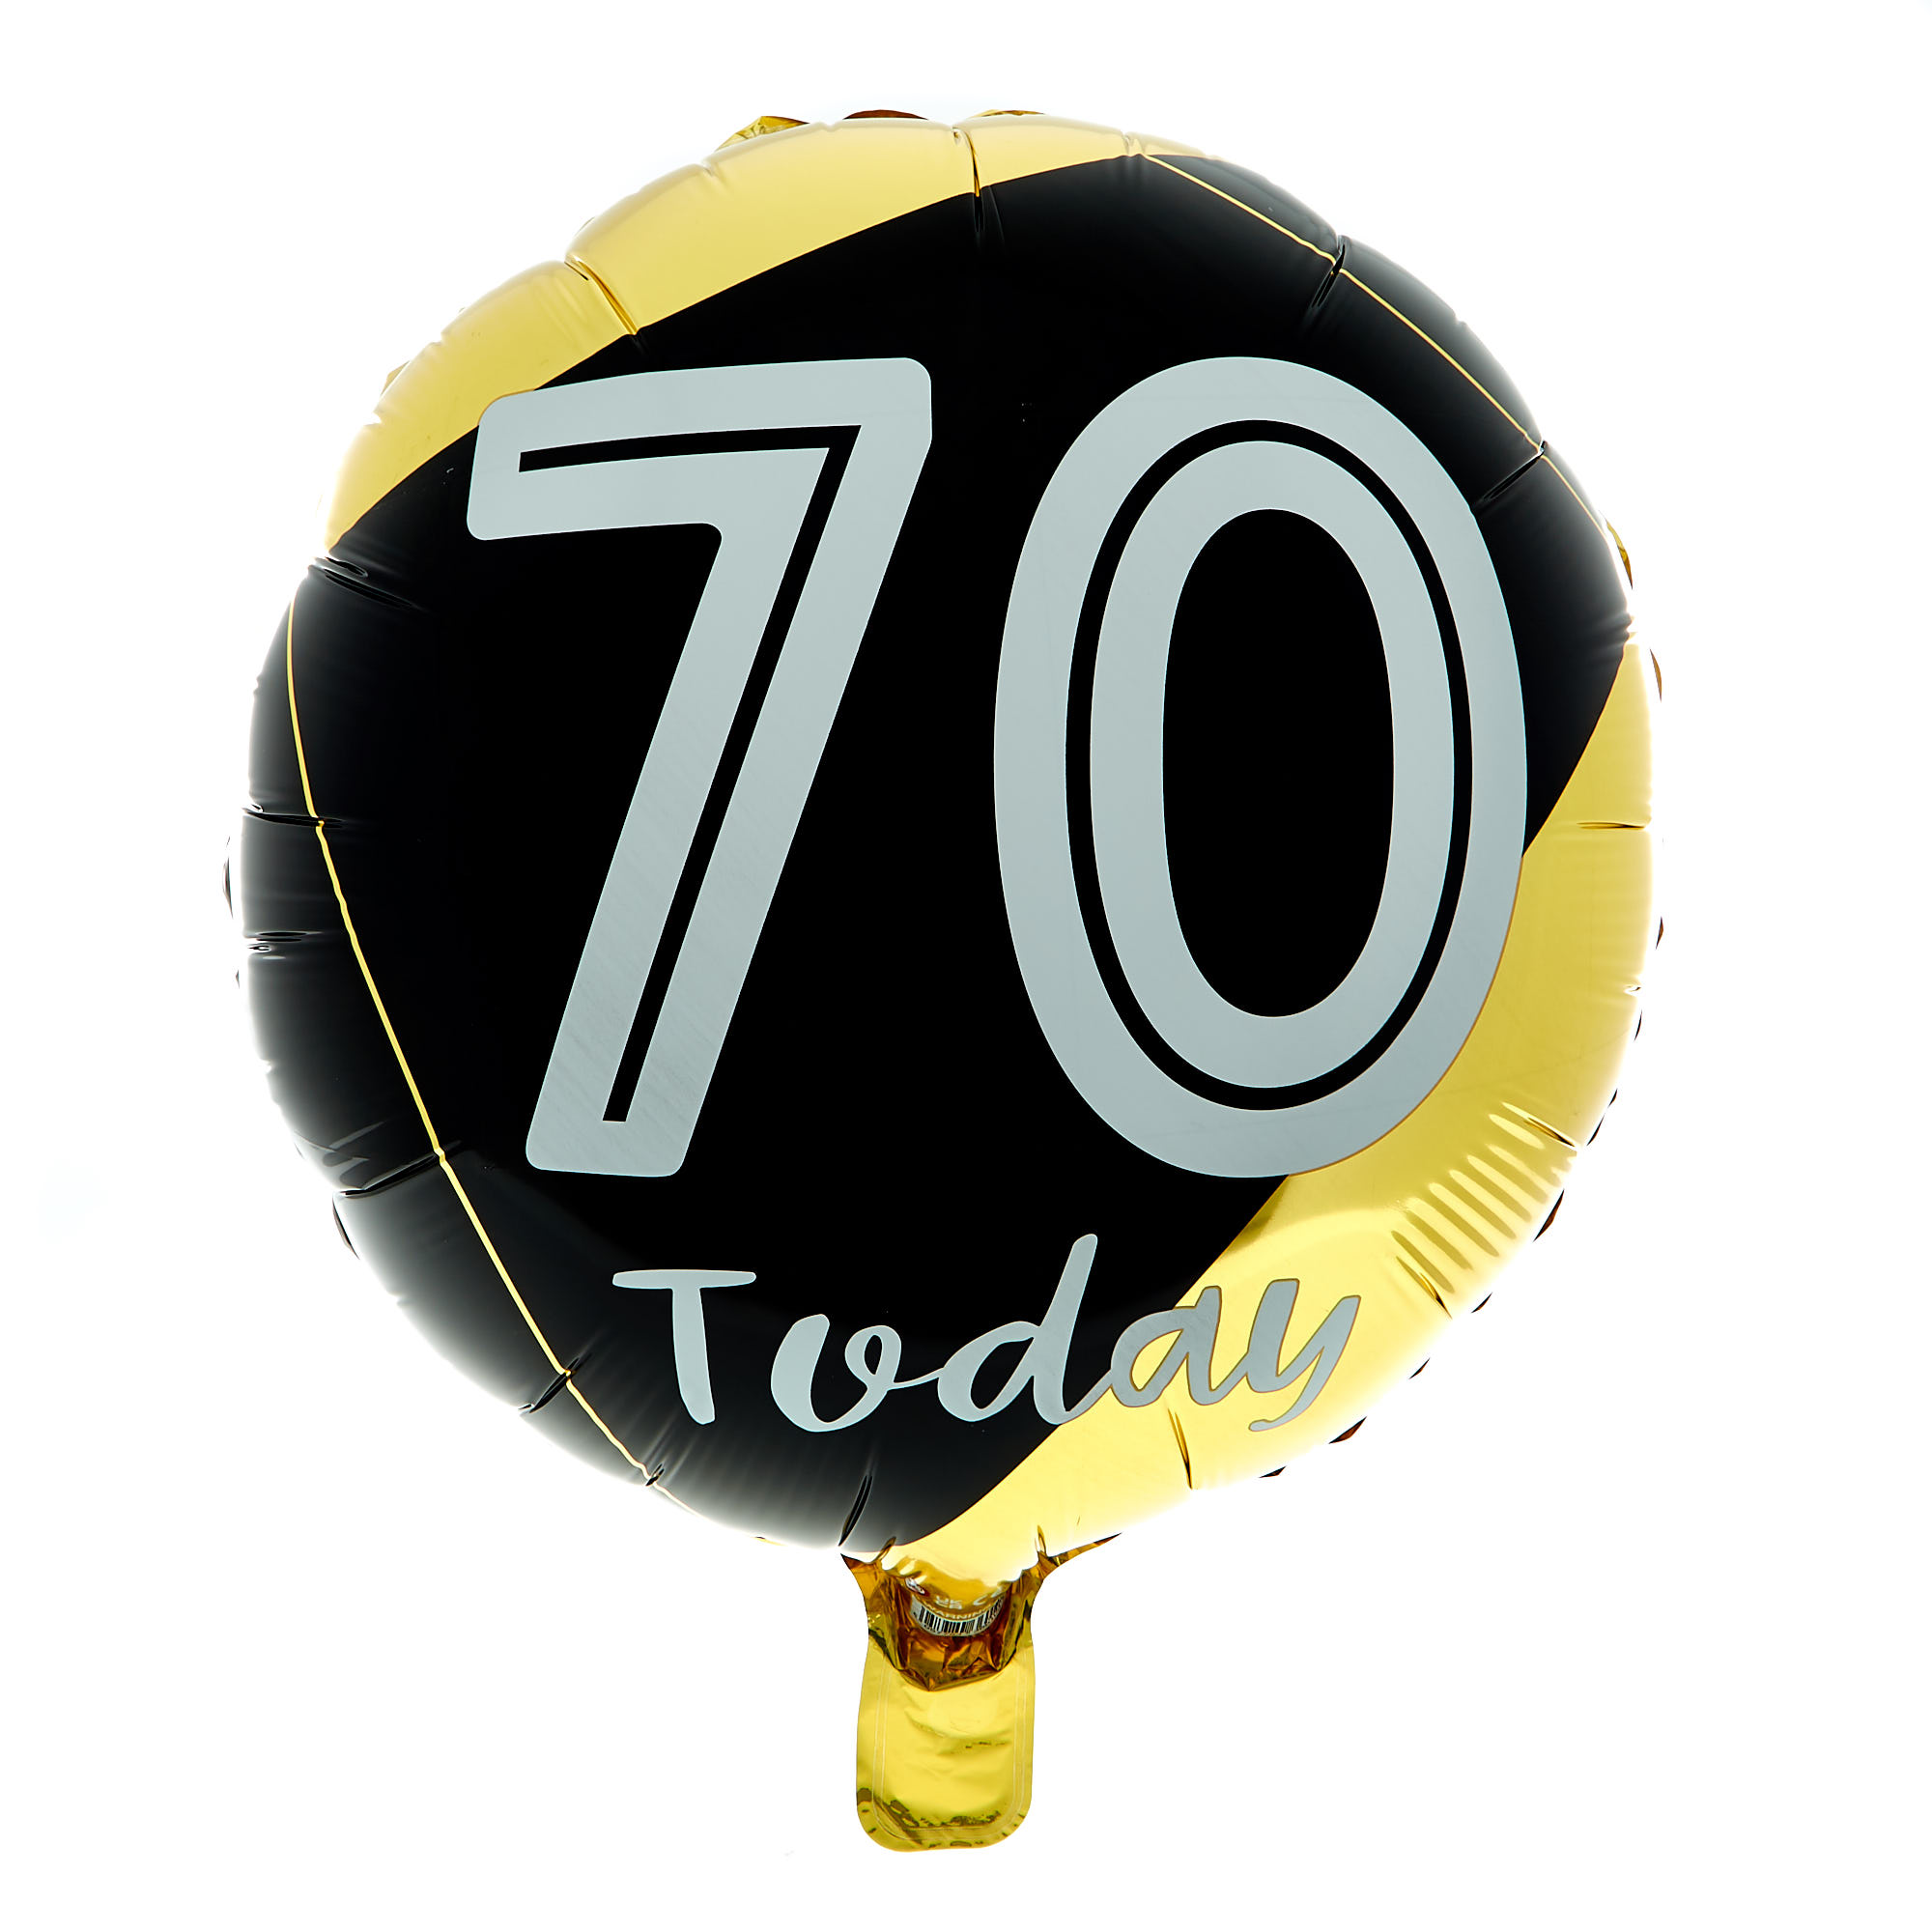 70 Today Birthday Balloon & Lindt Chocolate Box - FREE GIFT CARD!